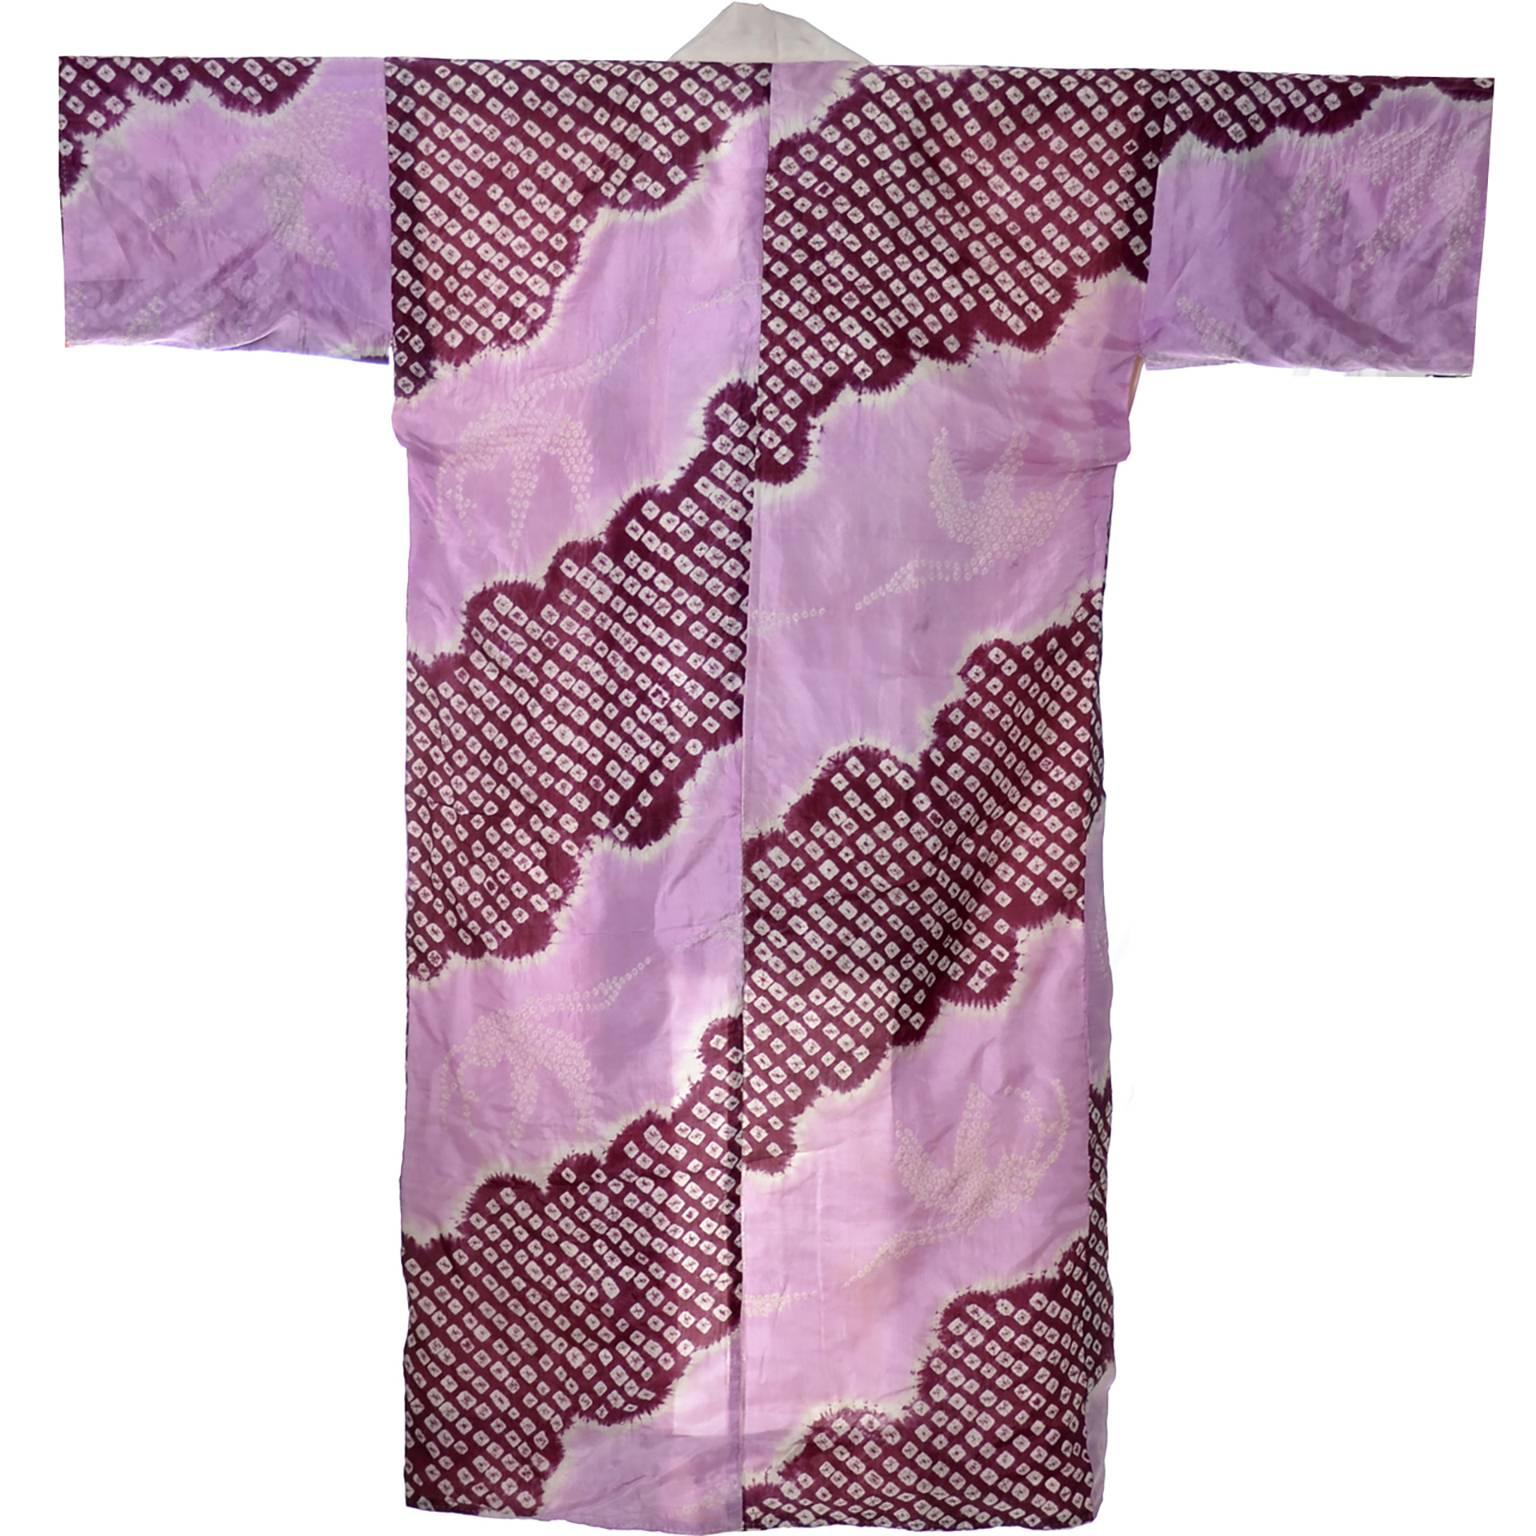 This is a stunning vintage 1920's Japanese silk kimono. It came from an estate I acquired that included many important pieces of Asian textiles and clothing. This could possibly be older, but I believe it to be from the 20's. This kimono is made